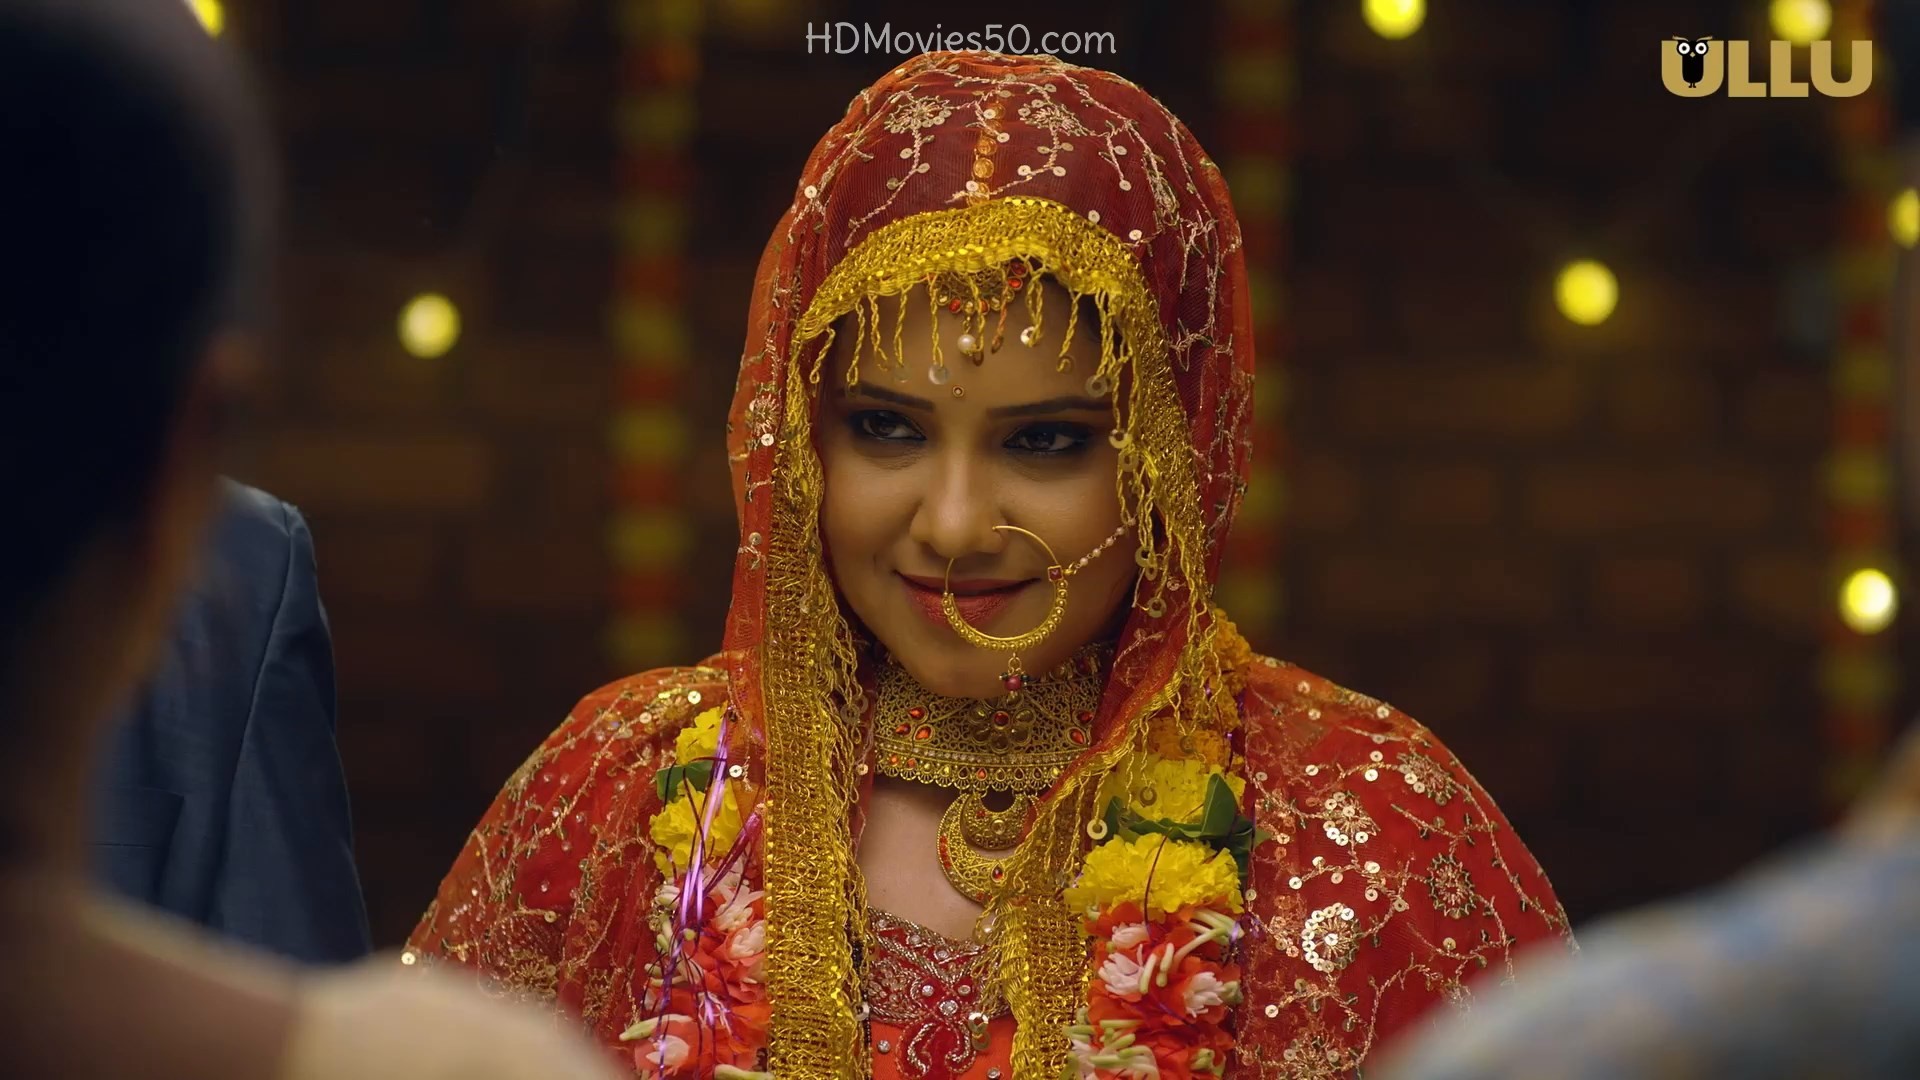 Shahad Part 1 Torrent Yts Yify Download in HD quality 1080p and 720p 2022 Movie | kat | tpb Screen Shot 1